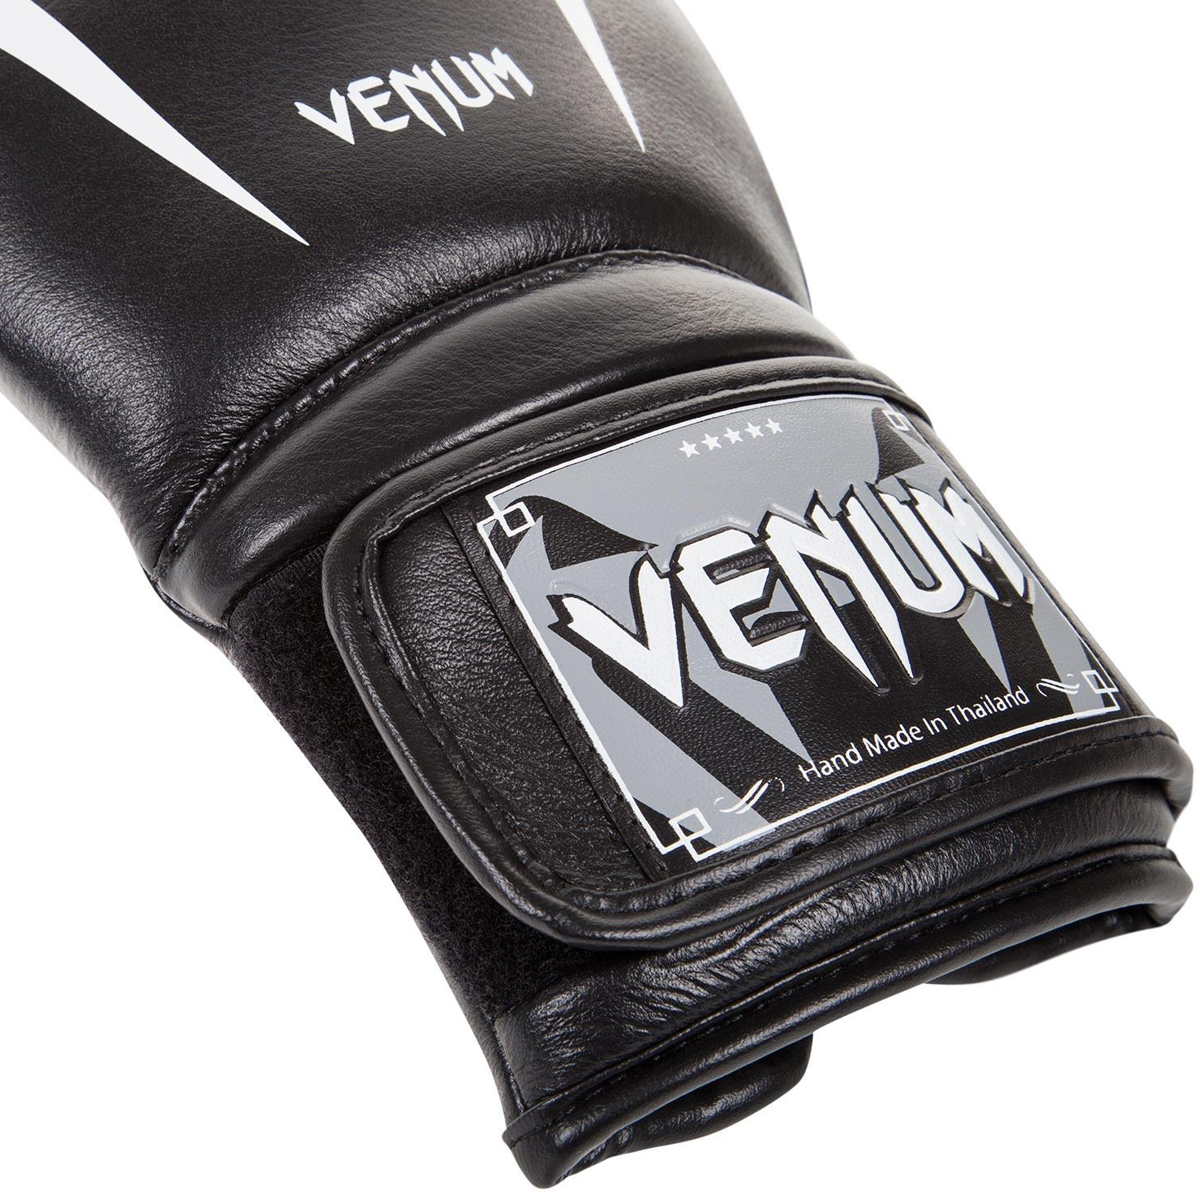 Venum Giant 3.0 Nappa Leather Hook and Loop Boxing Gloves - 12 oz. - Black/White - image 3 of 5